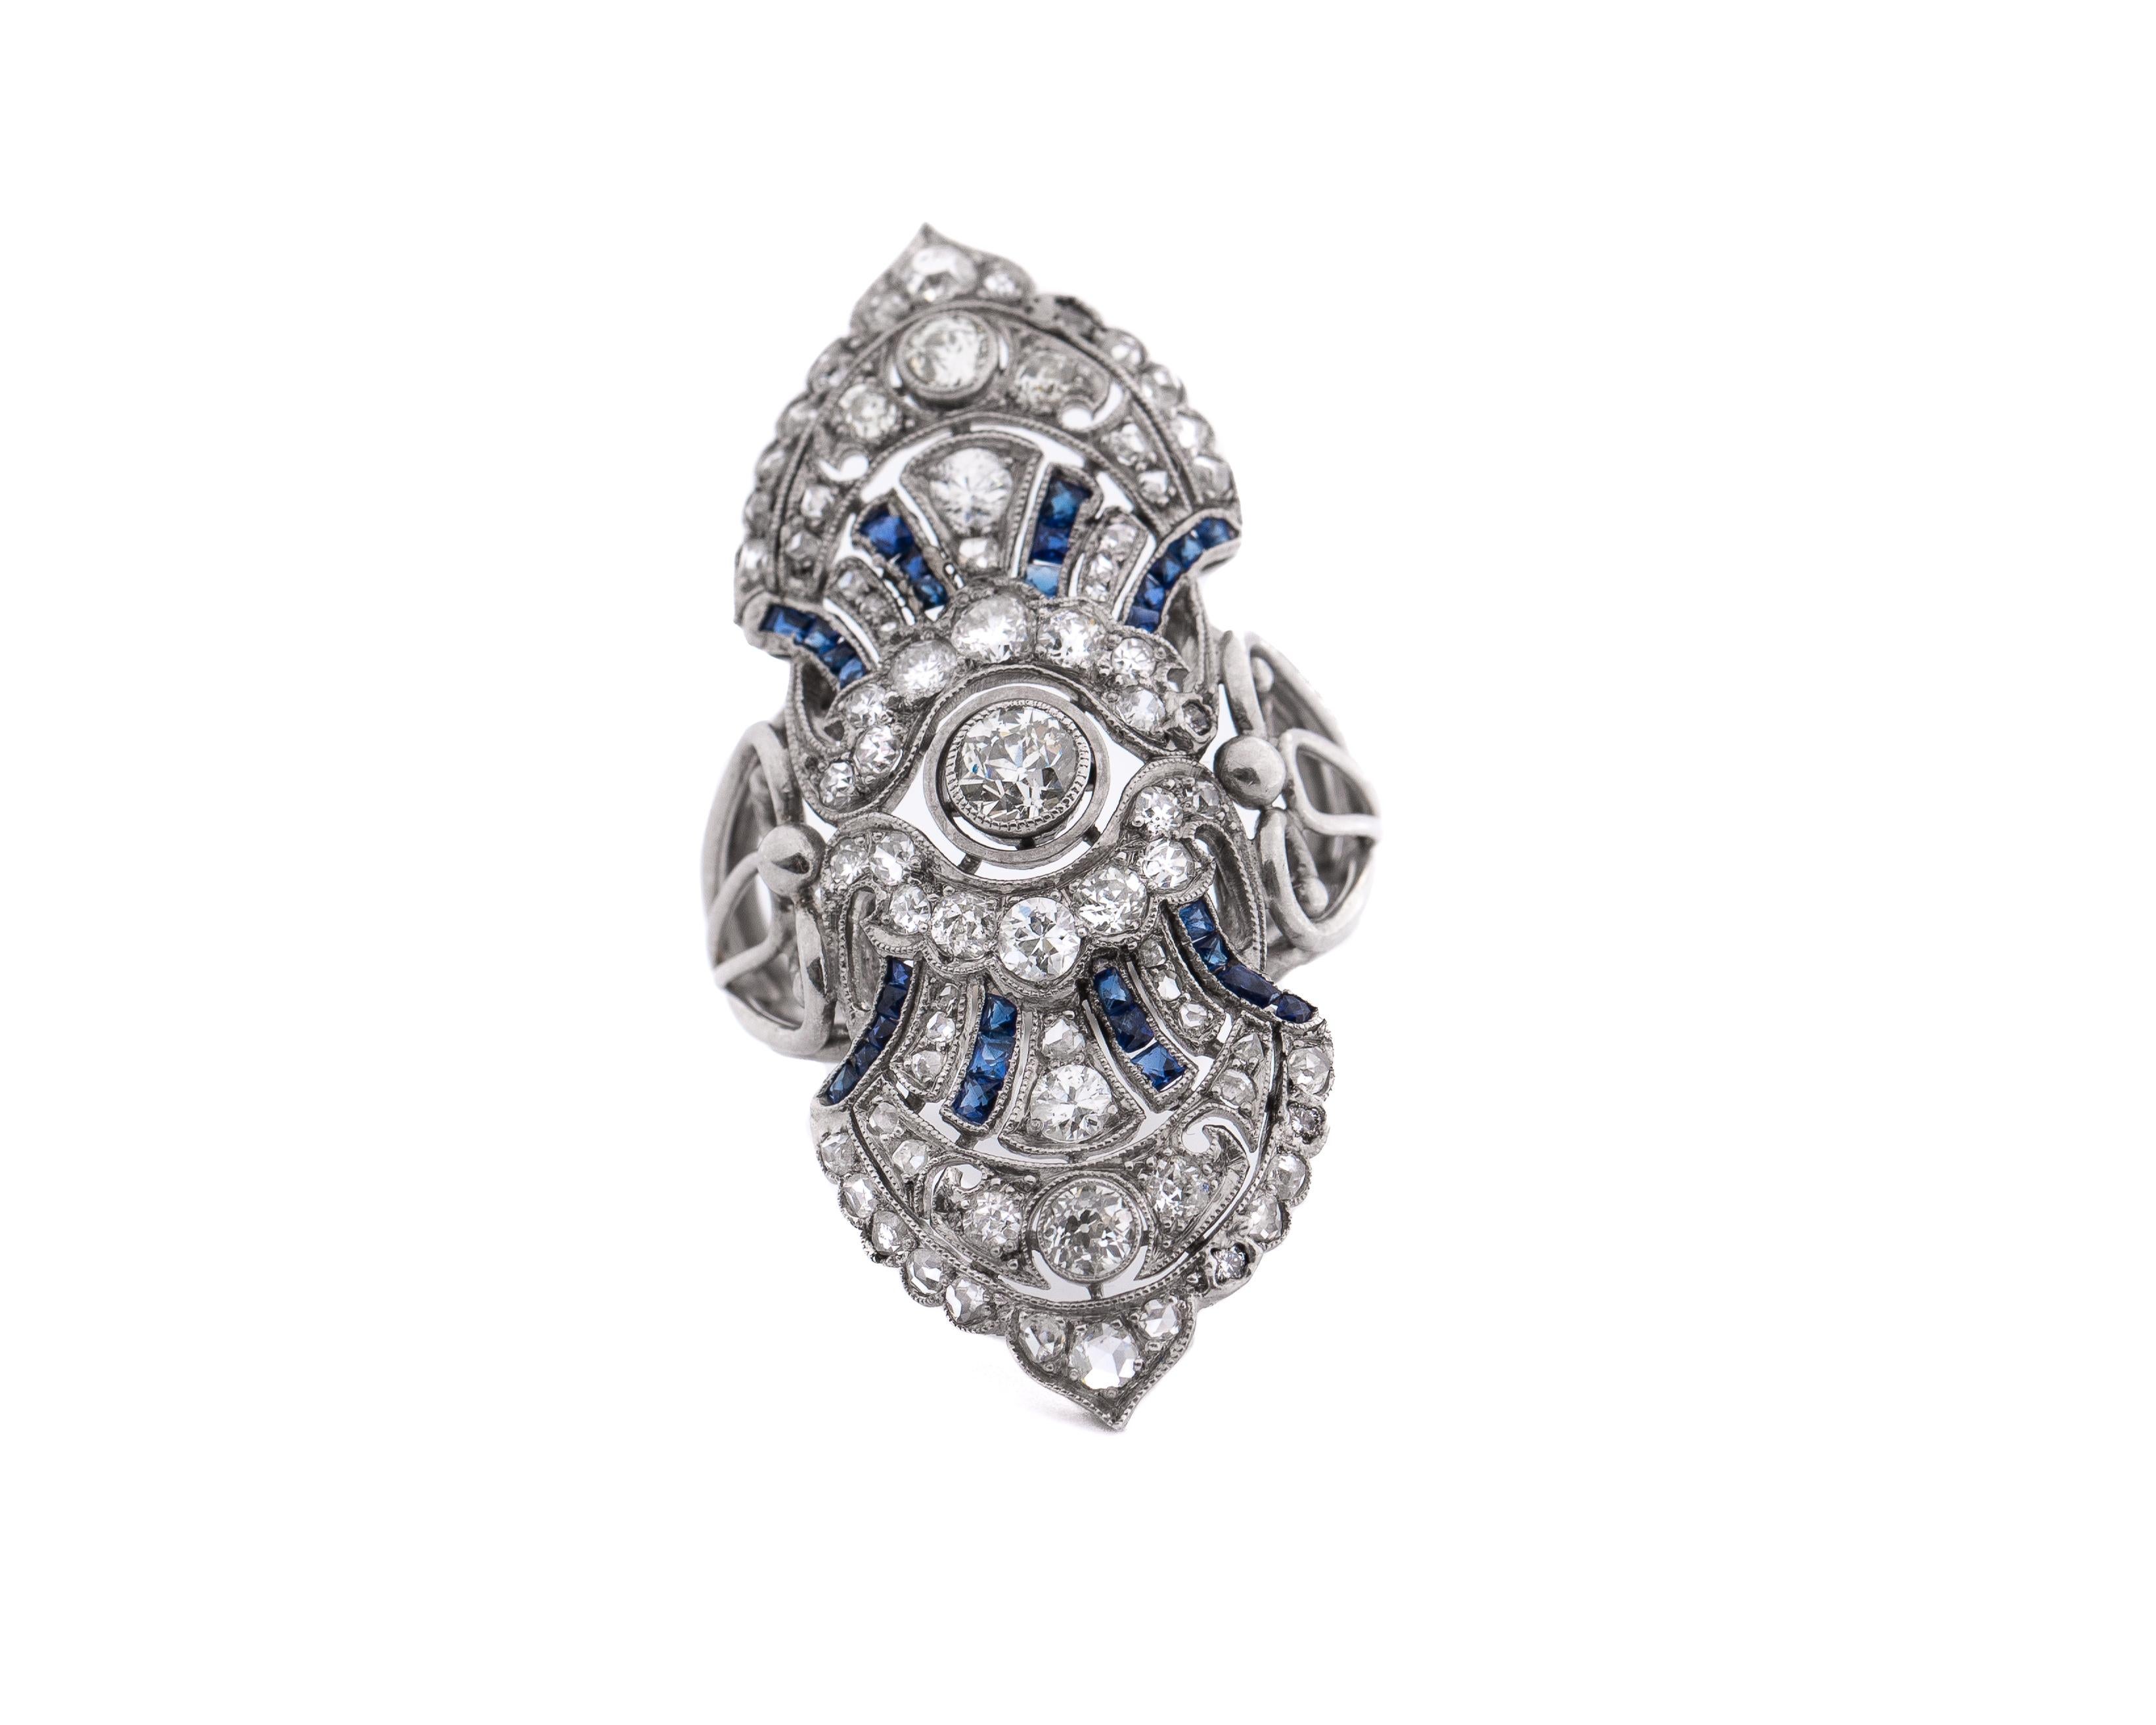 Here we have an extremely well done example of an early 1900s brooch converted long ago into a fantastic statement ring! This stunning shield is crafted in platinum with a total of 1.73 carats of dazzling old cut diamonds adorning the stylish